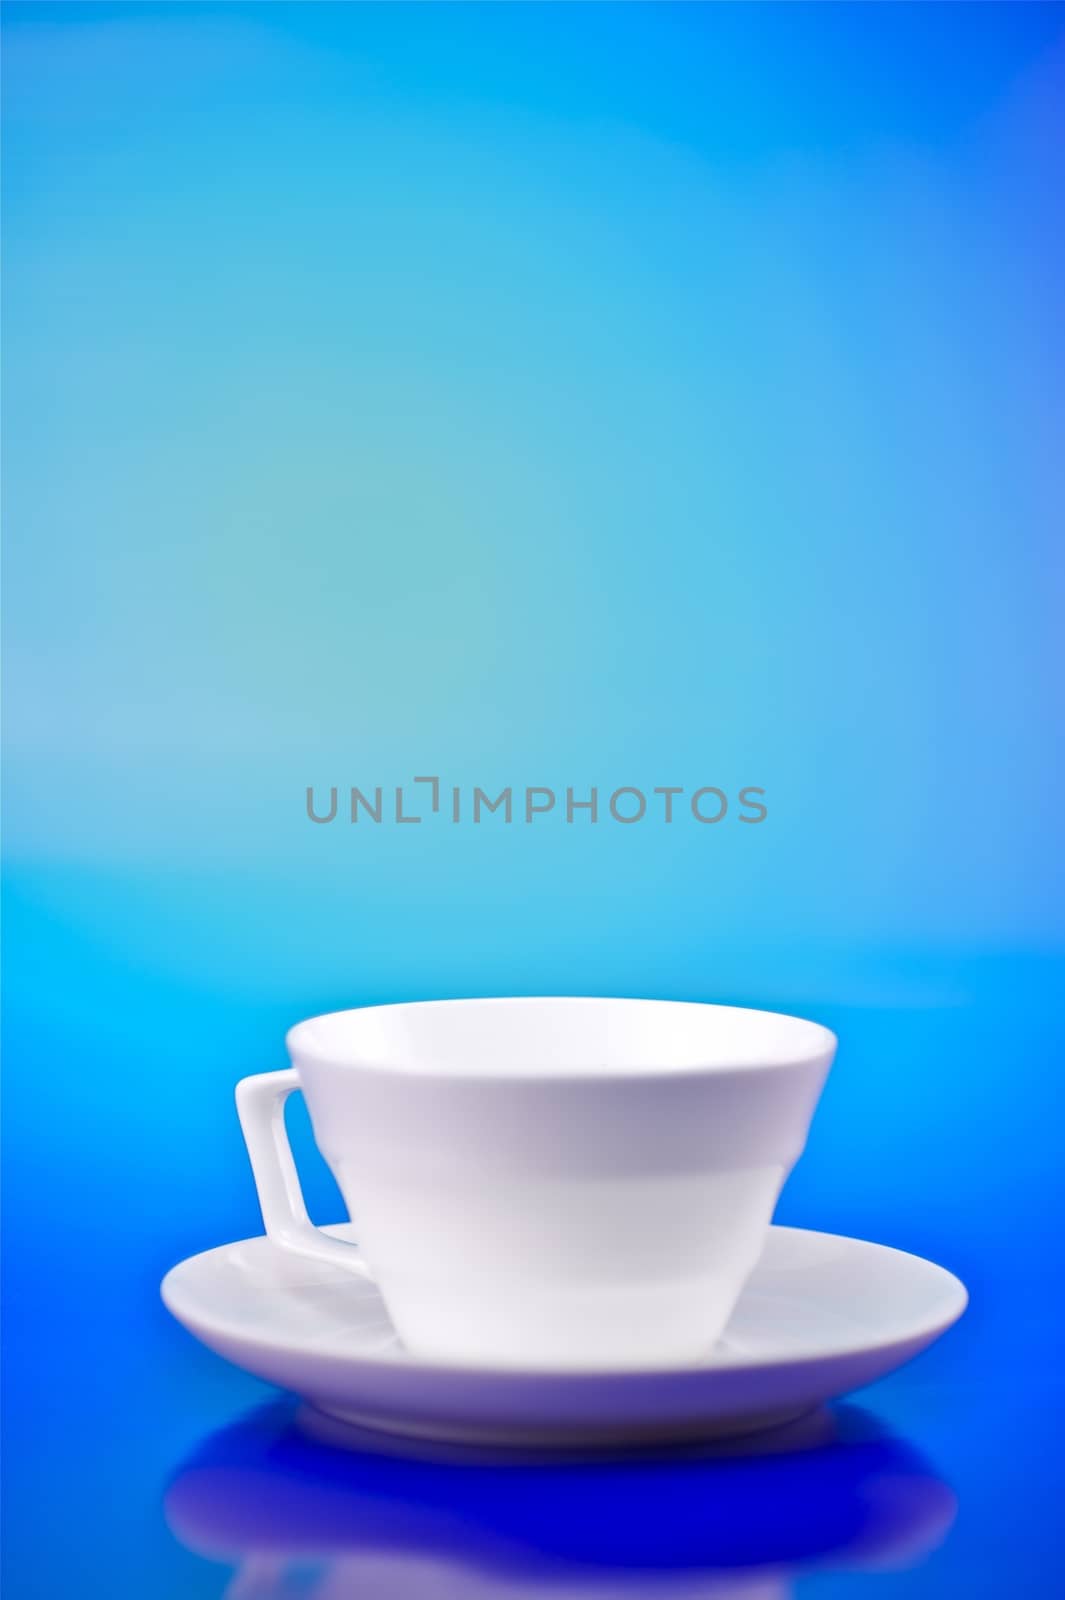 Whiter Small Cup on Blue Background. Vertical Studio Photo.